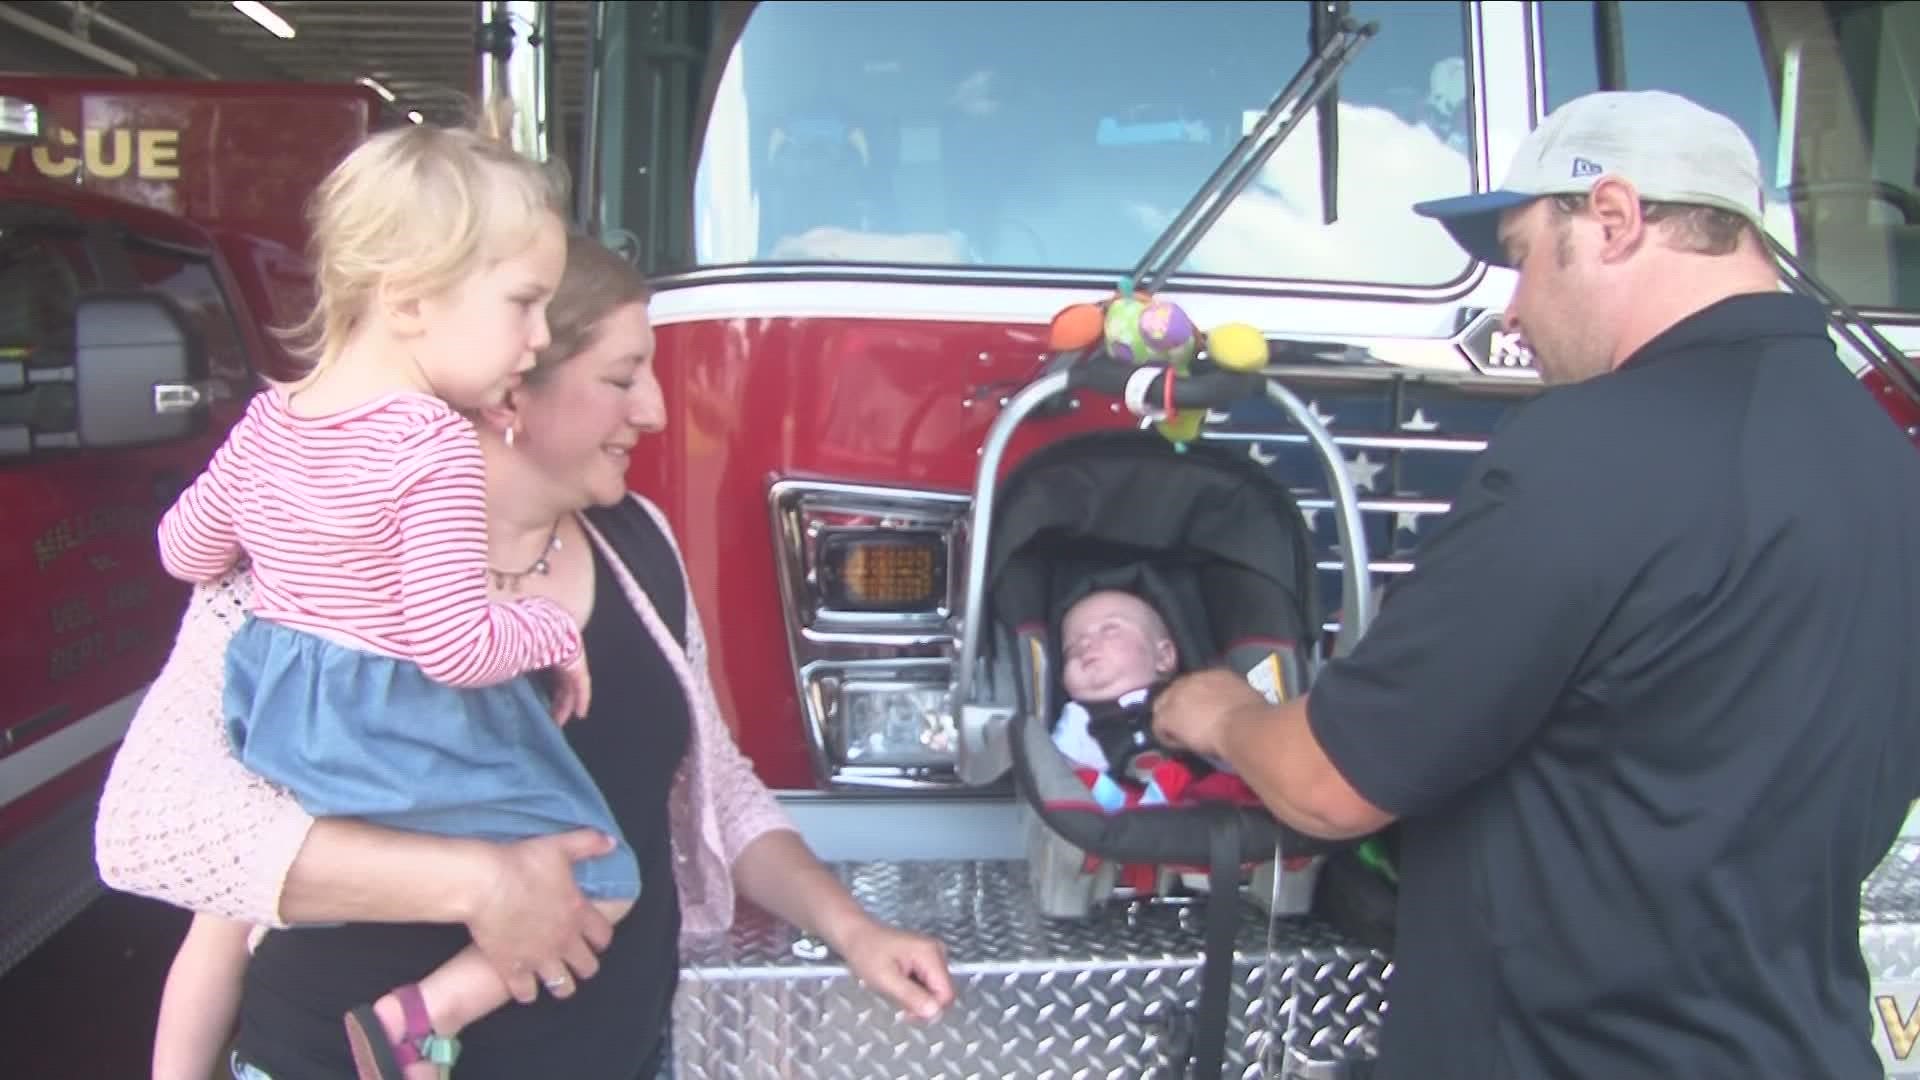 After serving 20 years in a volunteer fire department in Alden, the Millgrove chief made the save of his career, bringing his newborn baby back to life.